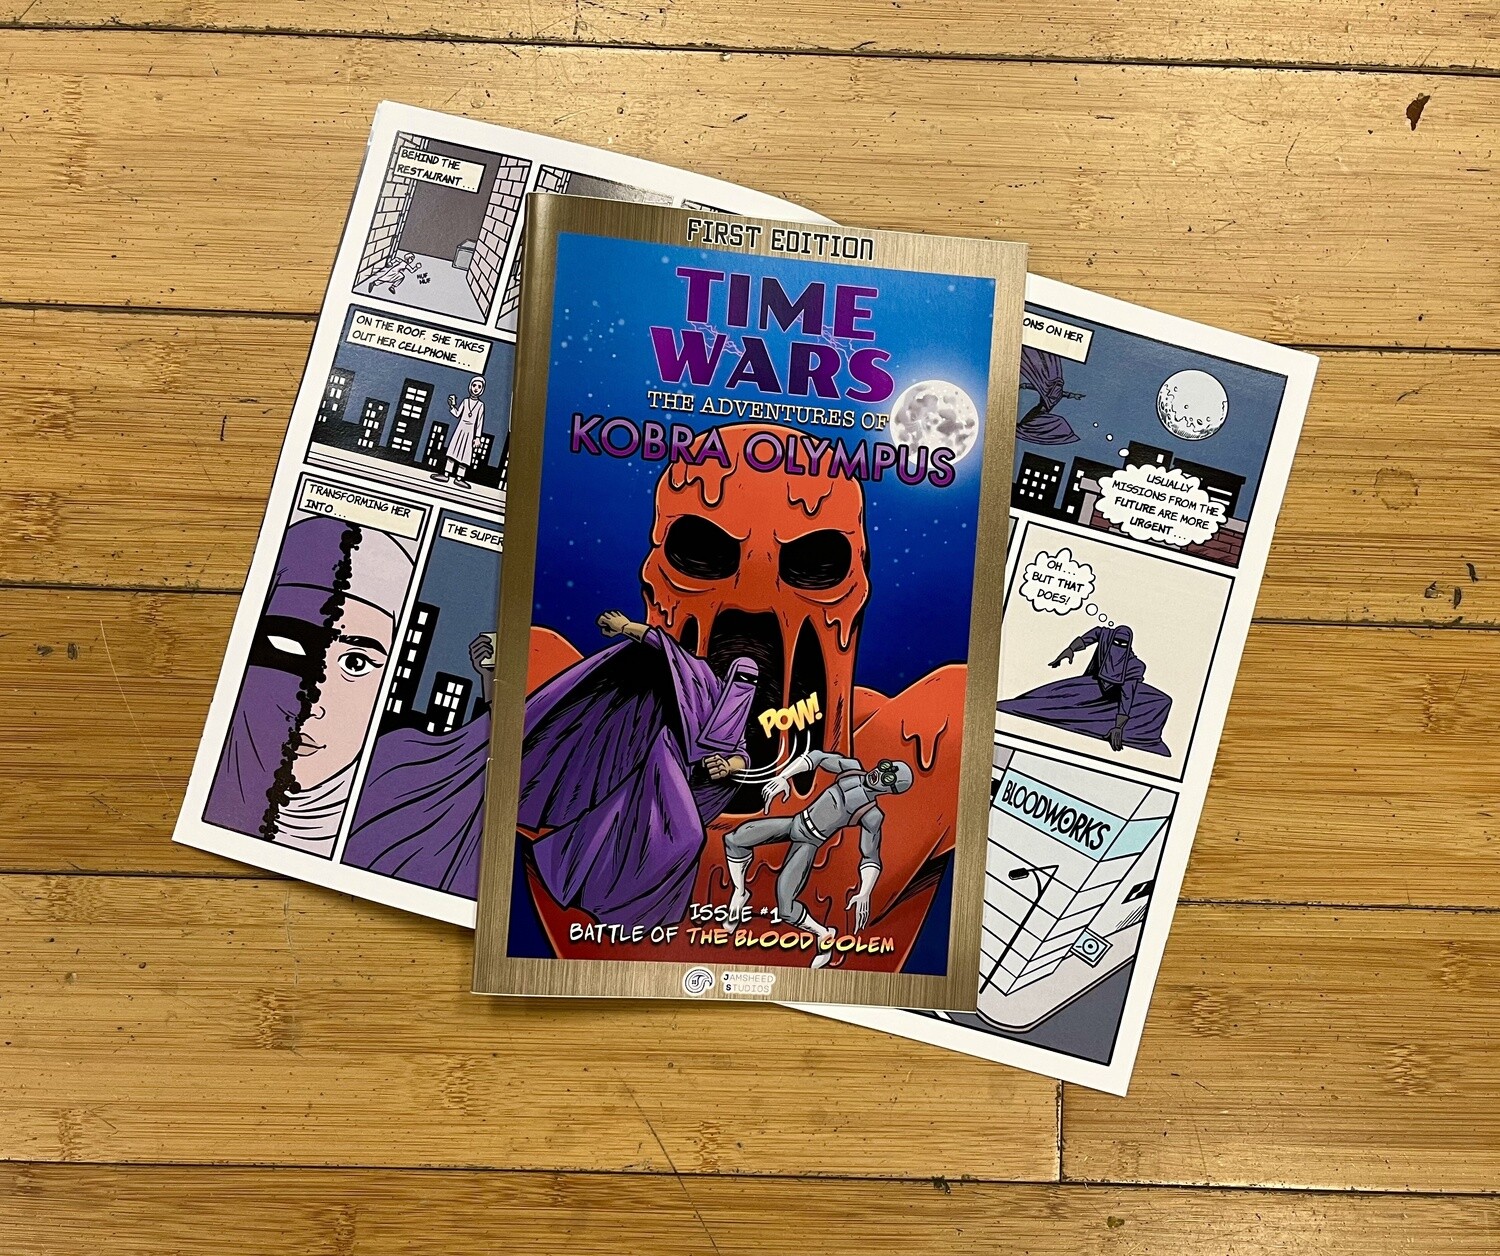 Time Wars, The Adventures of Kobra Olympus, #1 - Comic by Bijhan Agha and Swaptrap